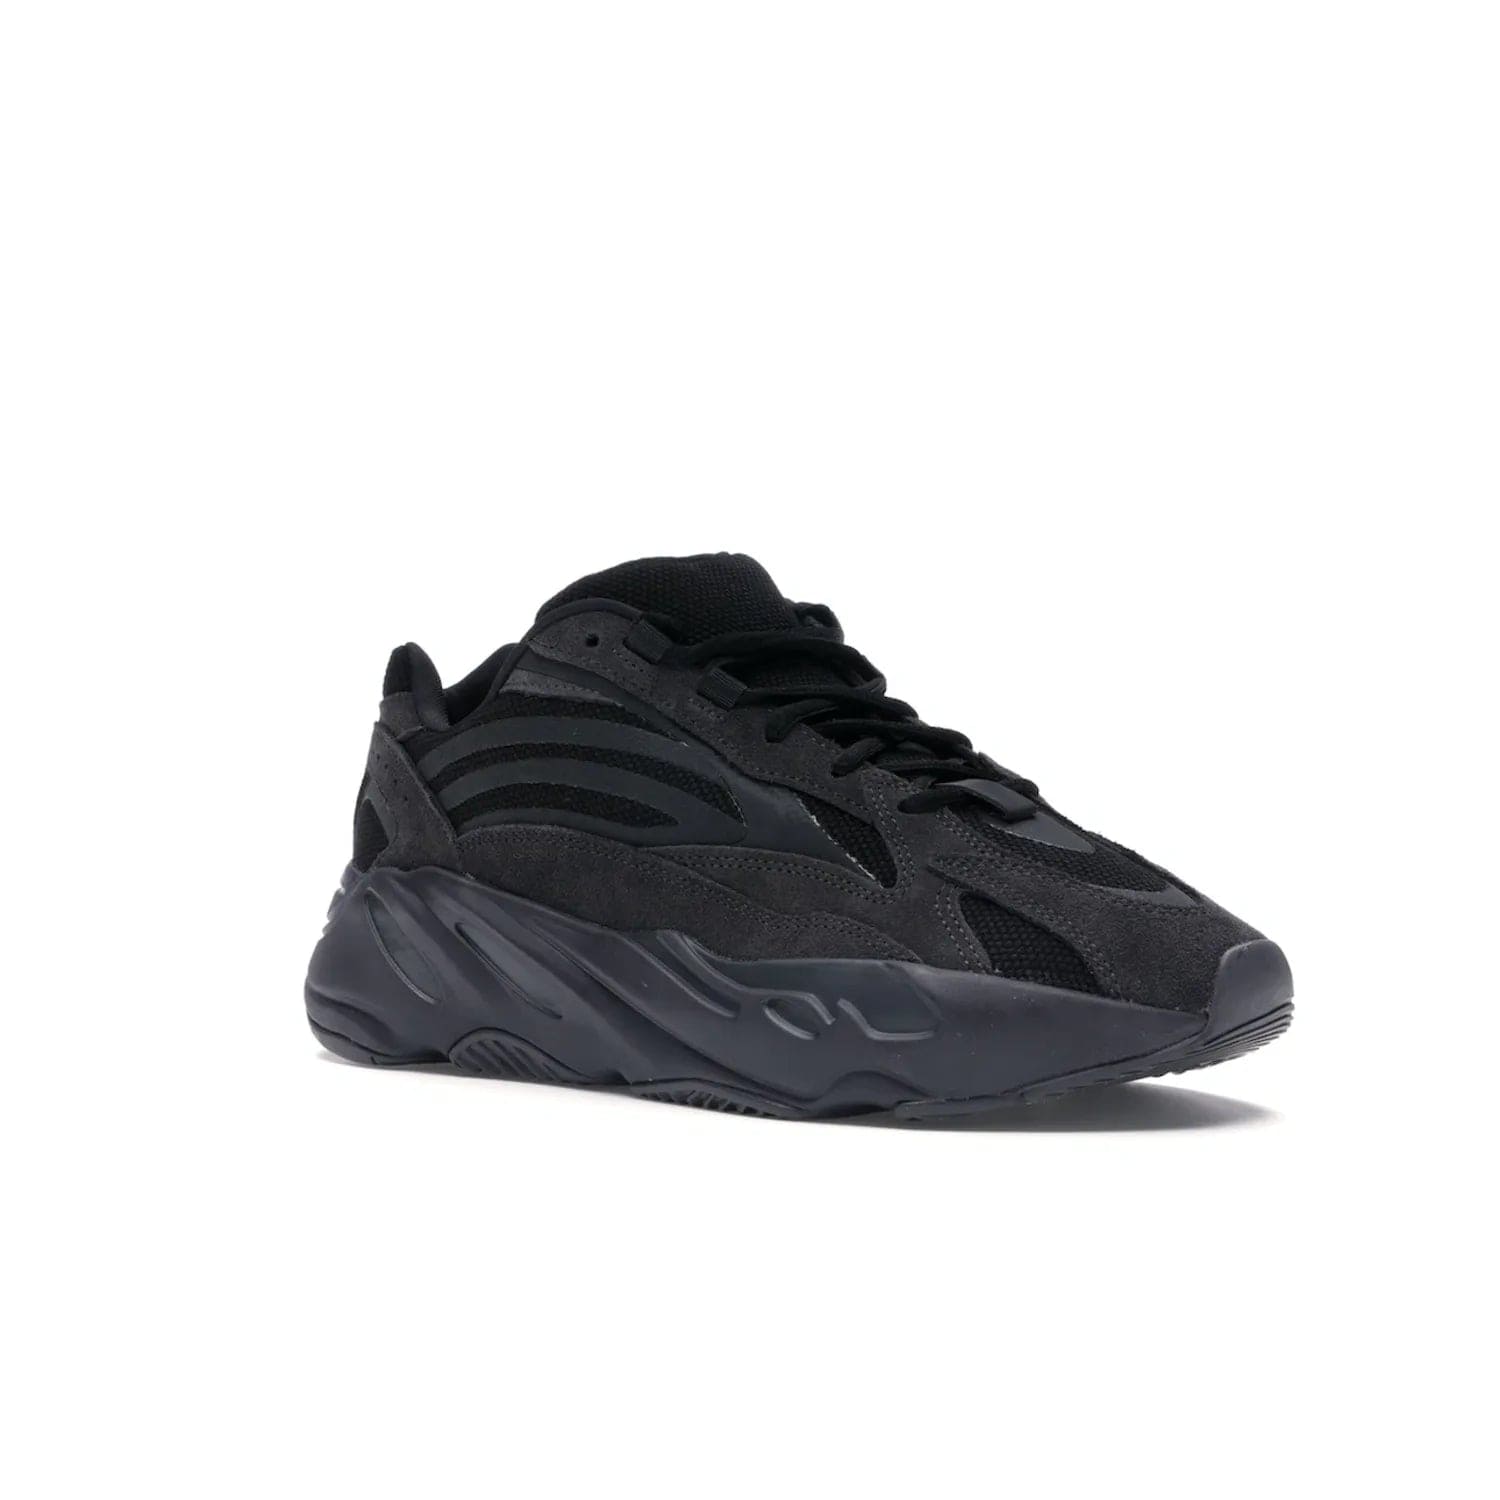 adidas Yeezy Boost 700 V2 Vanta - Image 5 - Only at www.BallersClubKickz.com - Introducing the adidas Yeezy Boost 700 V2 Vanta - a sleek and stylish all-black design featuring a combination of mesh, leather, and suede construction with signature Boost cushioning in the sole. The ultimate in comfort and support.